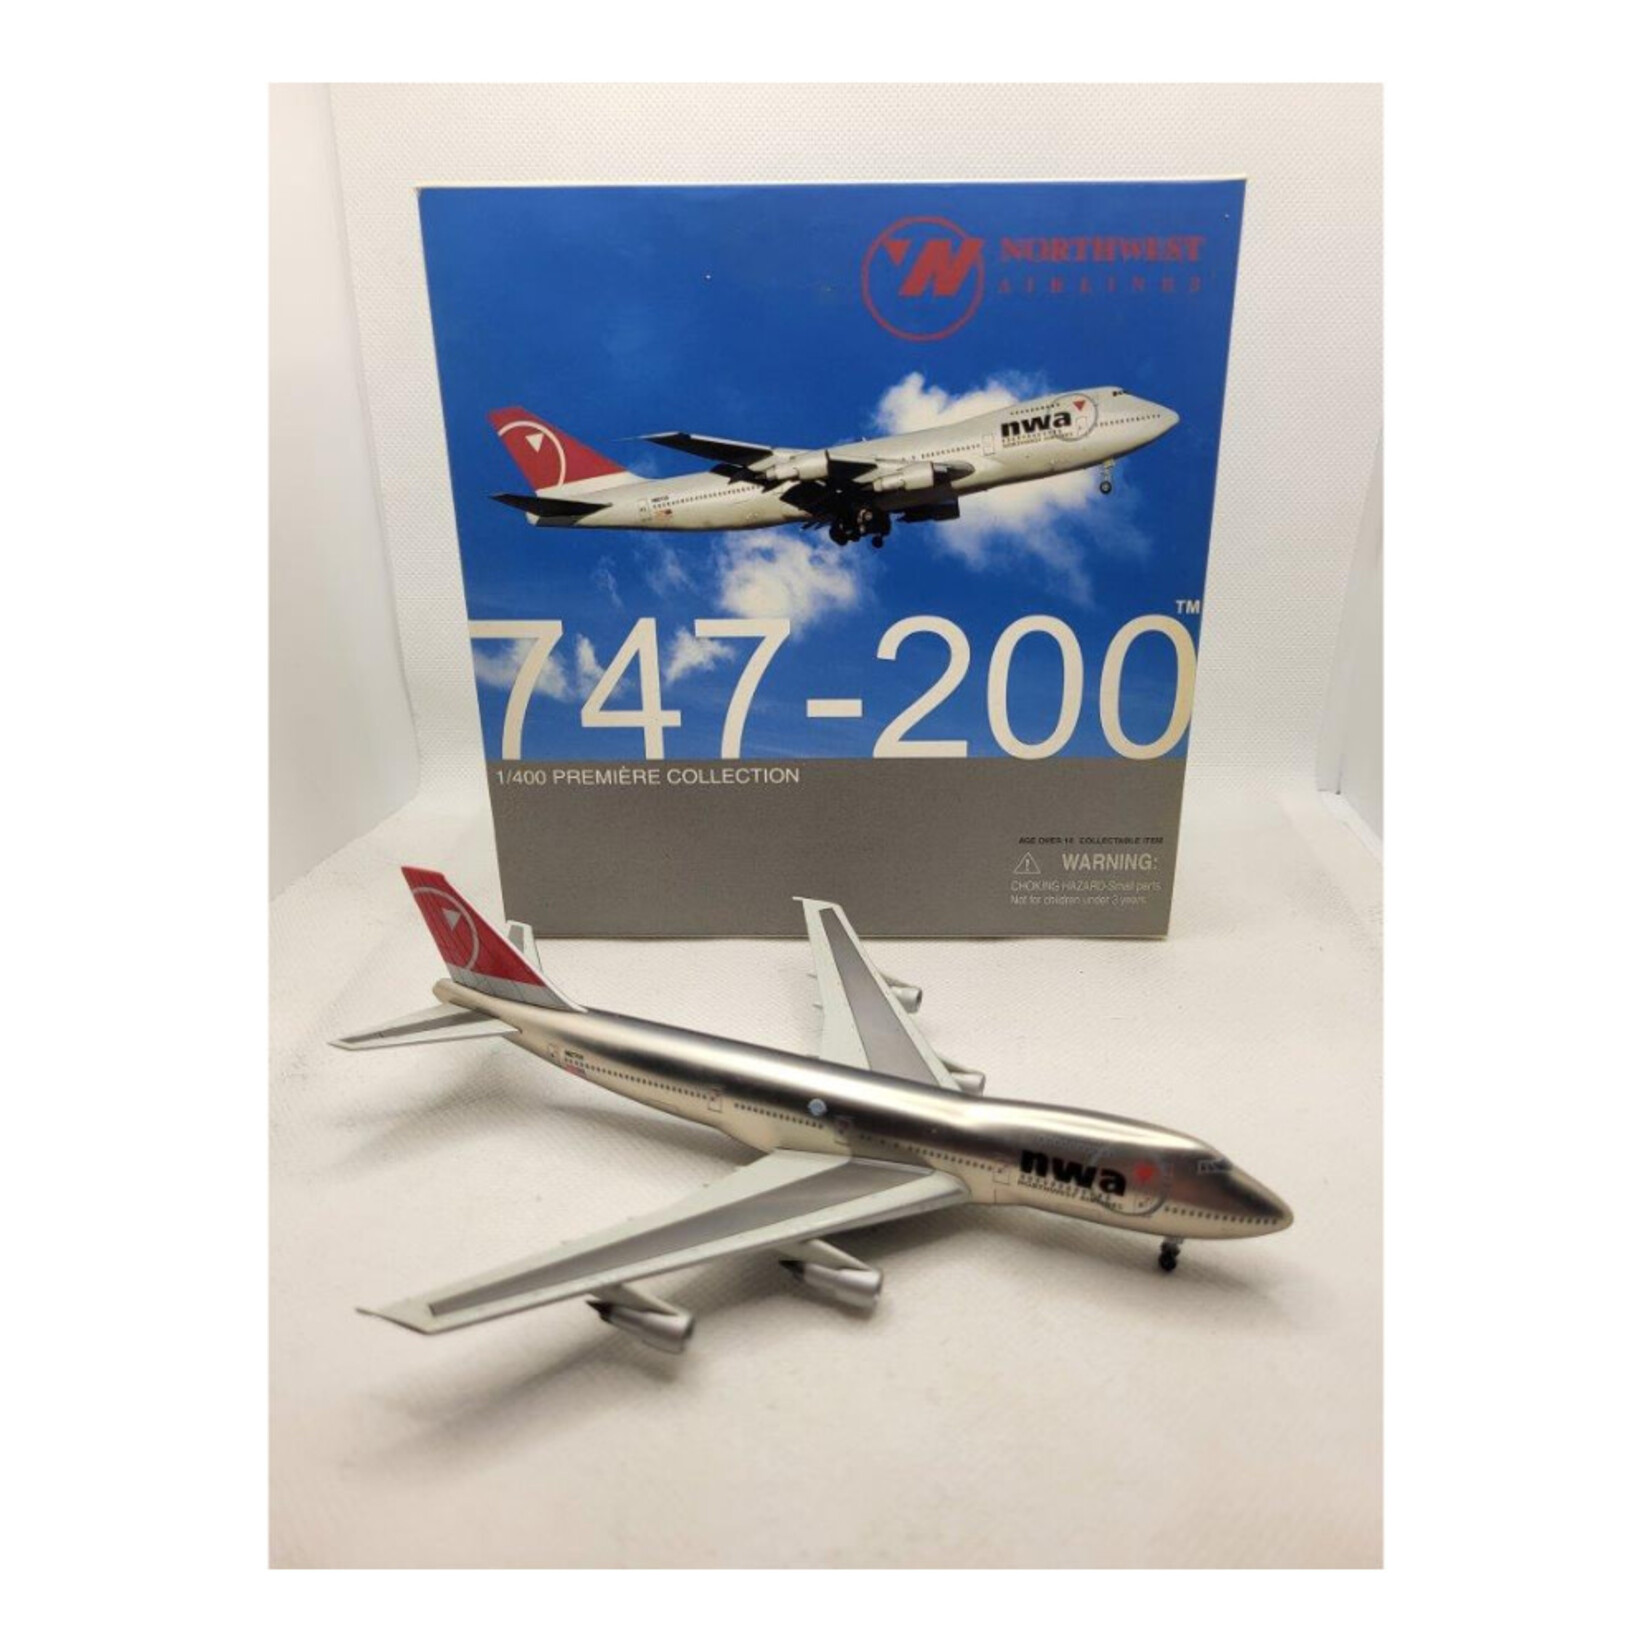 DRAGON WING DRAGON WINGS 1/400 NORTHWEST AIRLINES 747-200